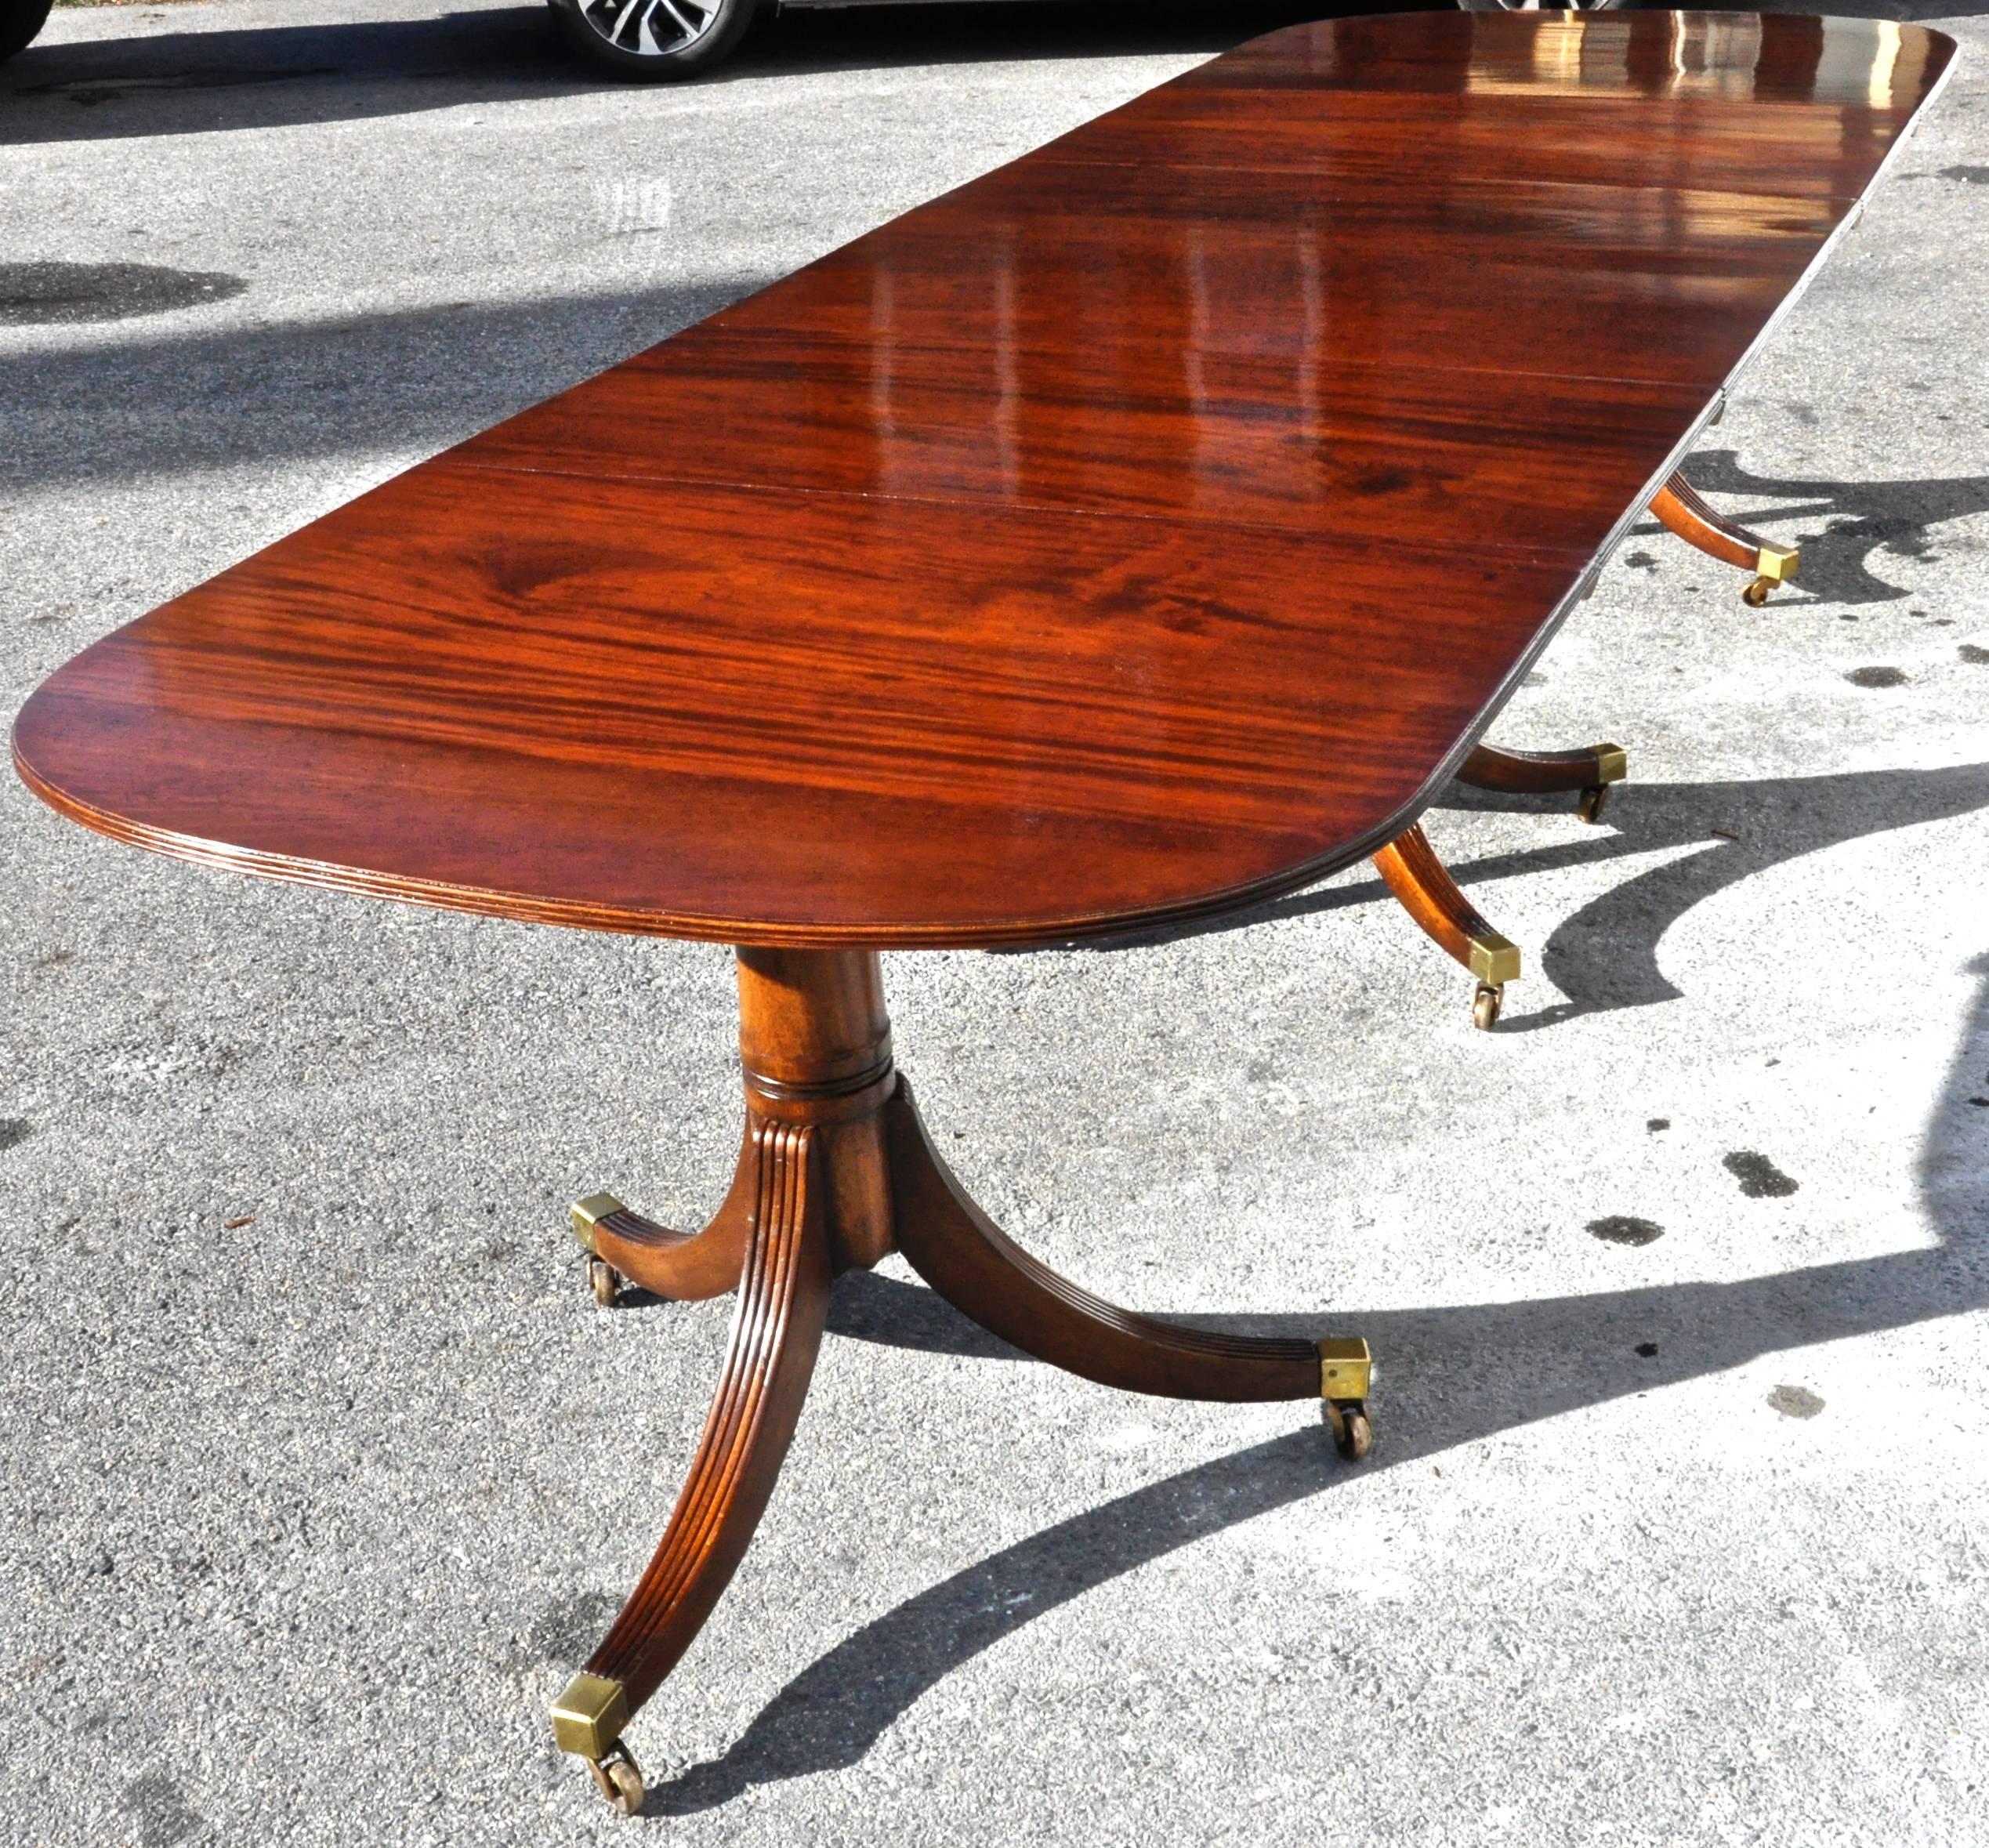 Mid-19th century mahogany three-pedestal dining table.

Bookmatched original Cuban mahogany.
Nice figuring.
Leaves original to table.
Three sections and two leaves.

Dimensions: 138